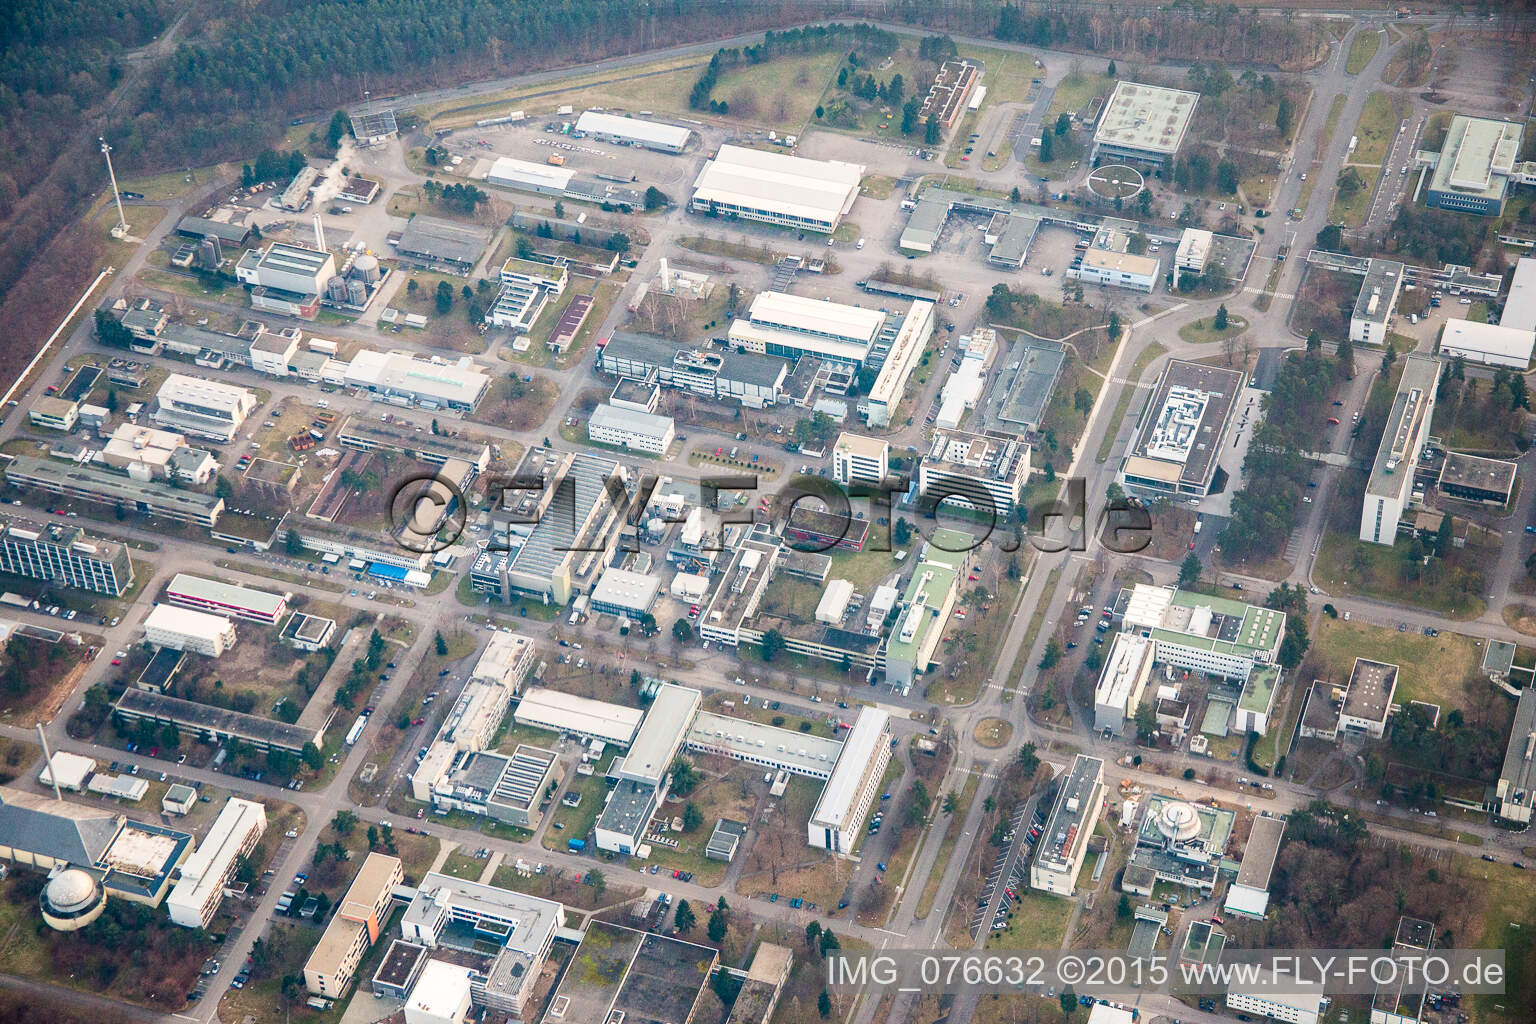 KIK Campus North in the district Leopoldshafen in Eggenstein-Leopoldshafen in the state Baden-Wuerttemberg, Germany from the plane